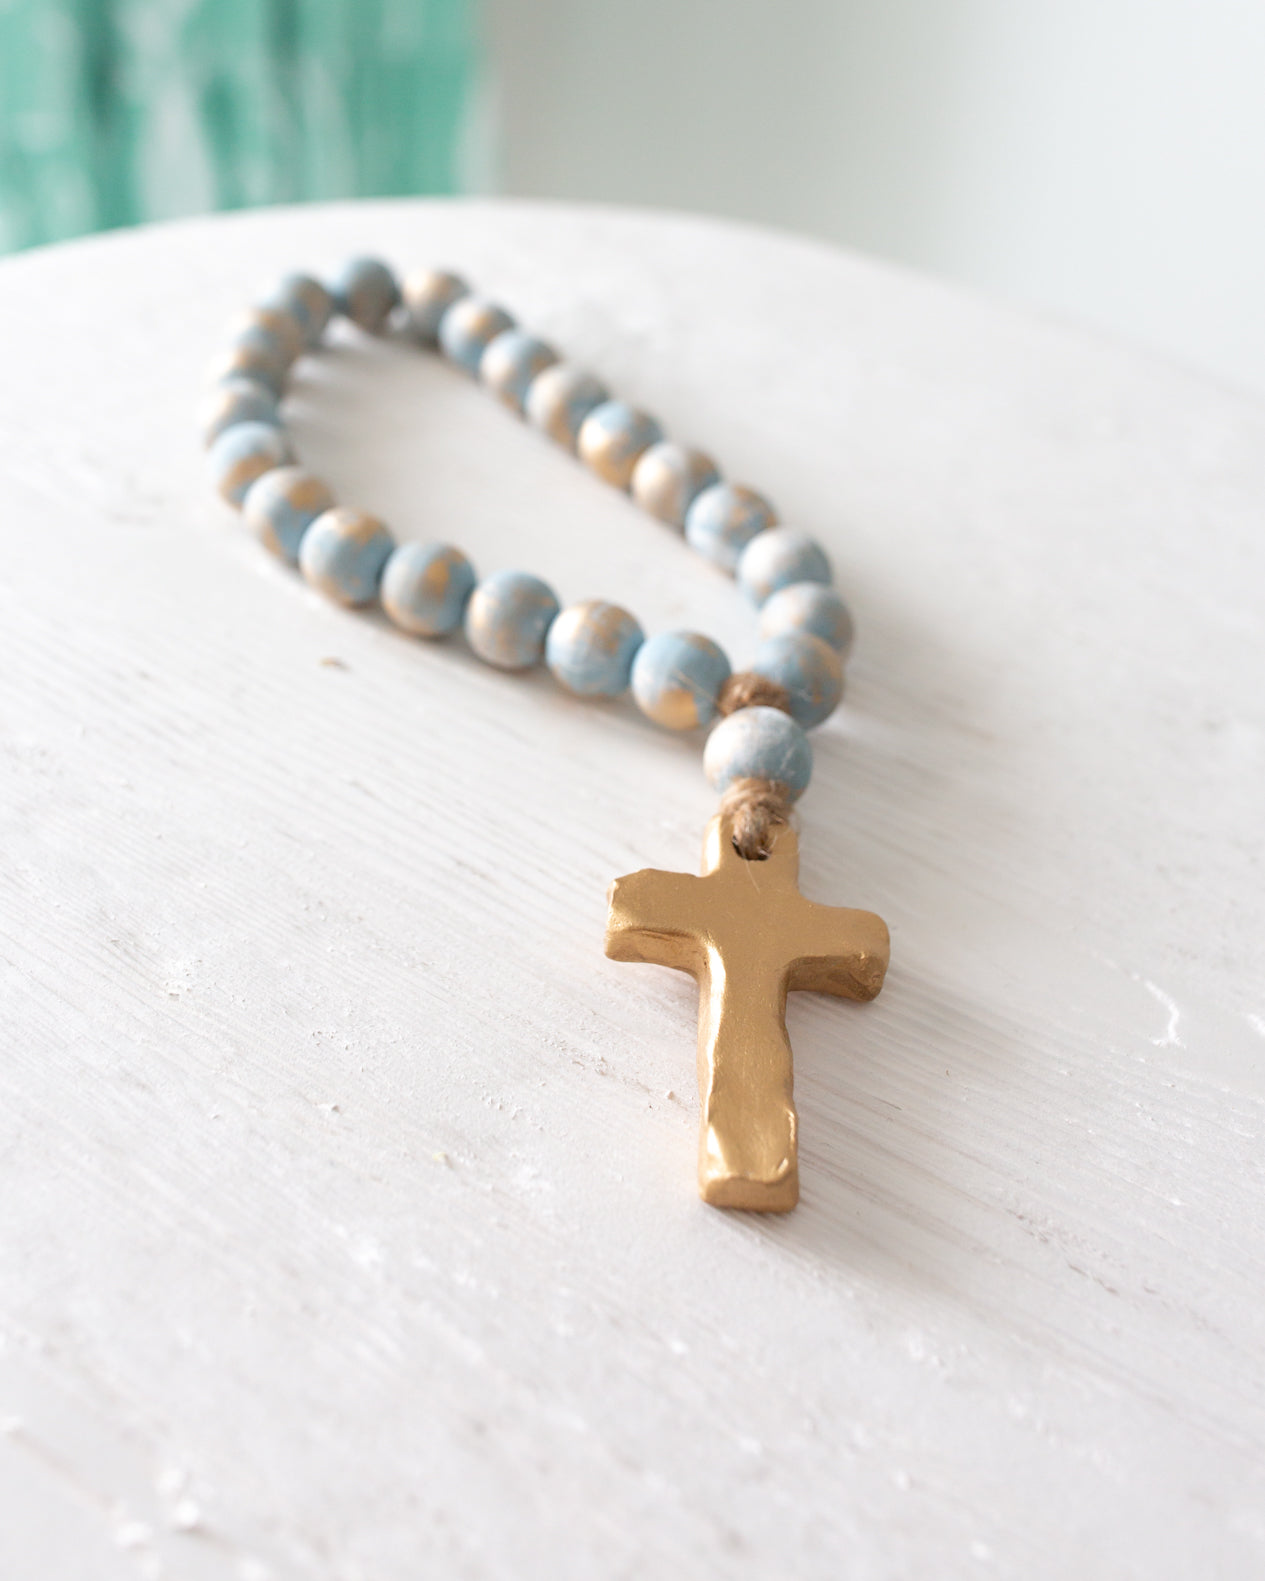 The Sercy Studio Small Blessing Bead In Blue Benefiting Must Ministries